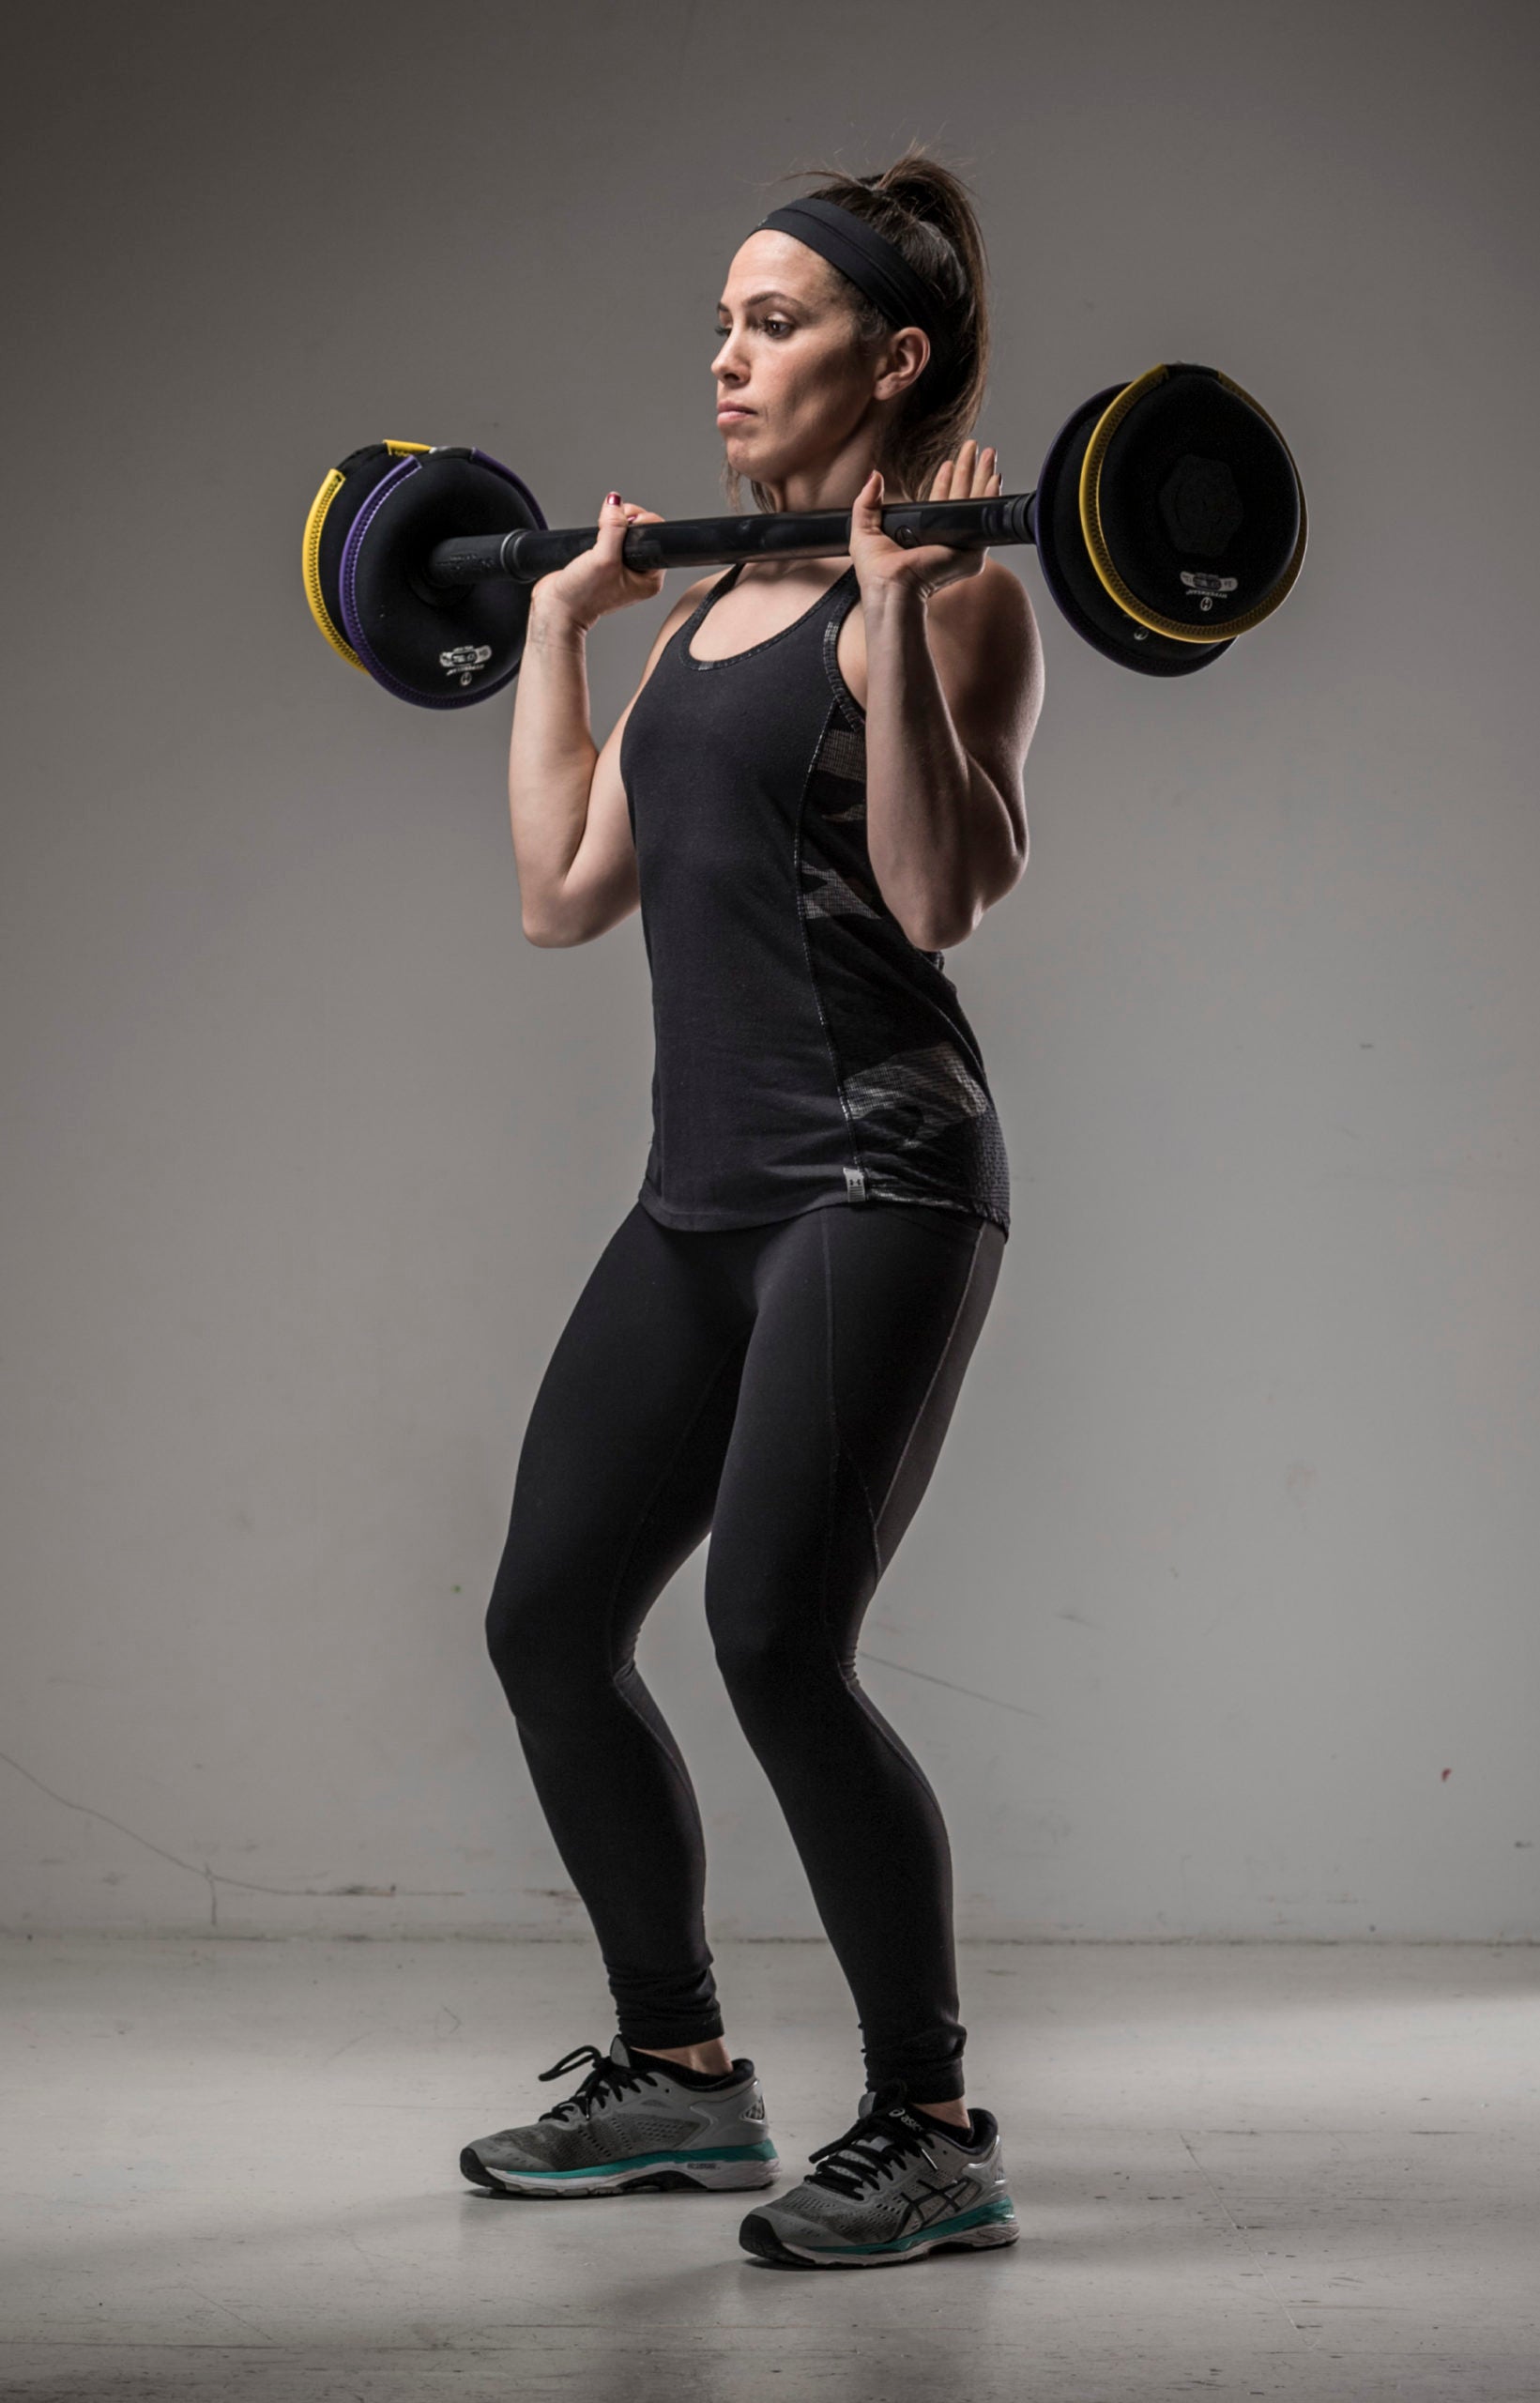 image of female fitness model holding the barbell weight set at 45 lbs in the clean position